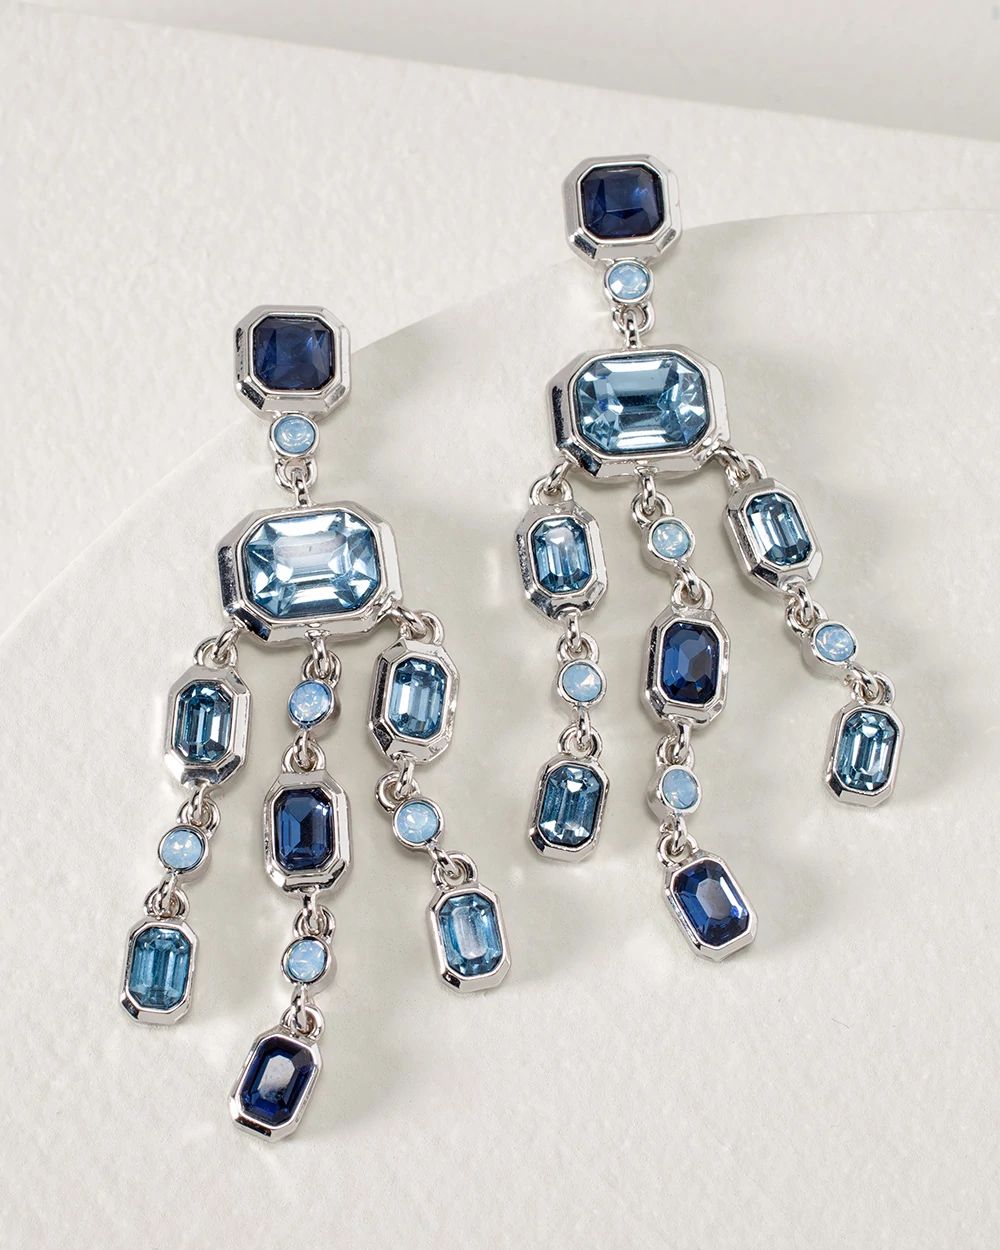 Silvertone & Blue Chandelier Earrings click to view larger image.